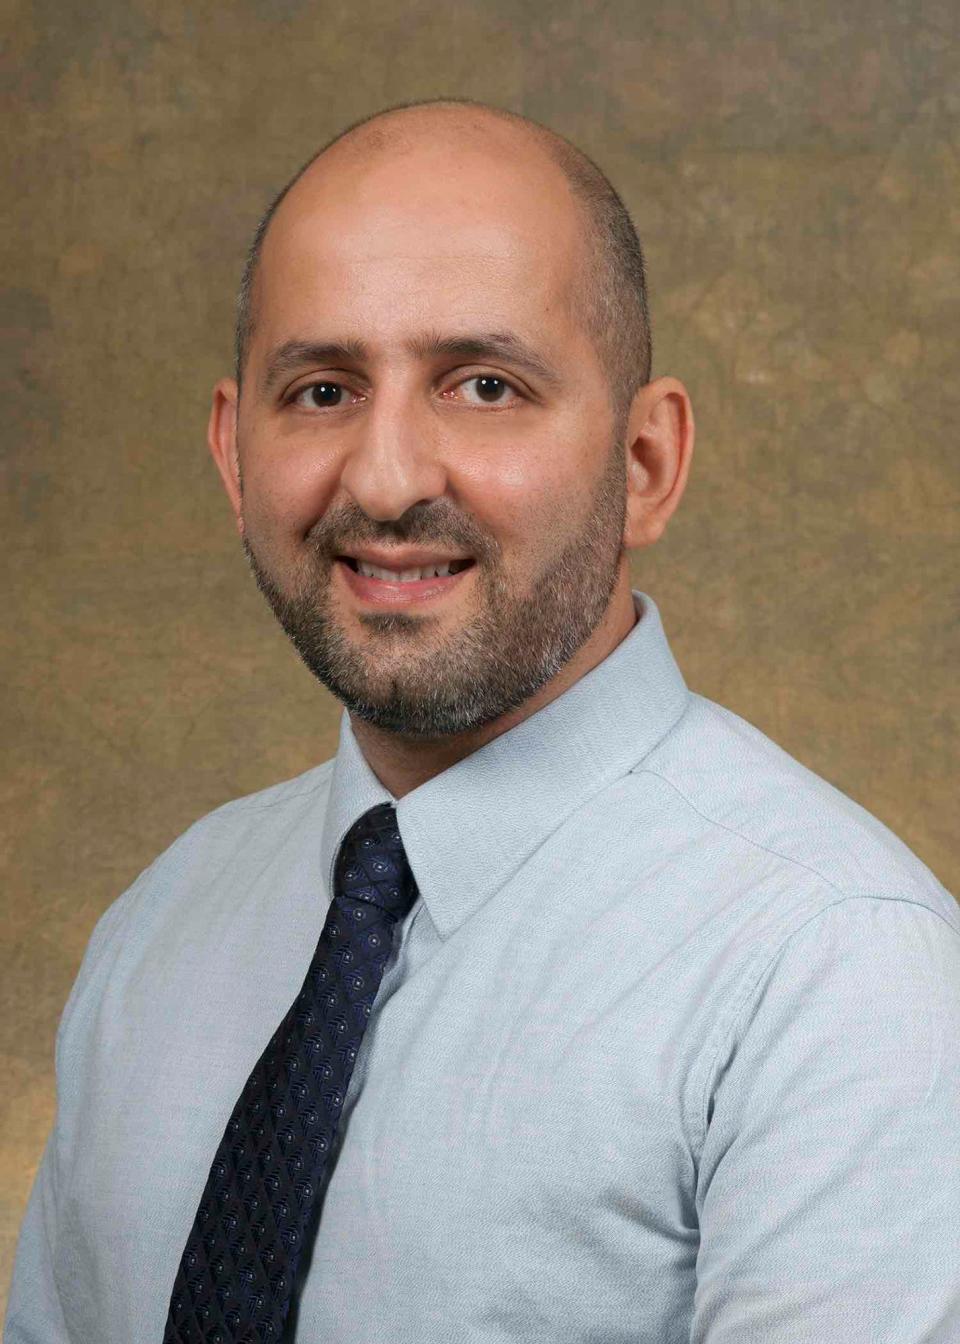 Dr. Arash Javanbakht, director of the Stress, Trauma, and Anxiety Research Clinic at Wayne State University.